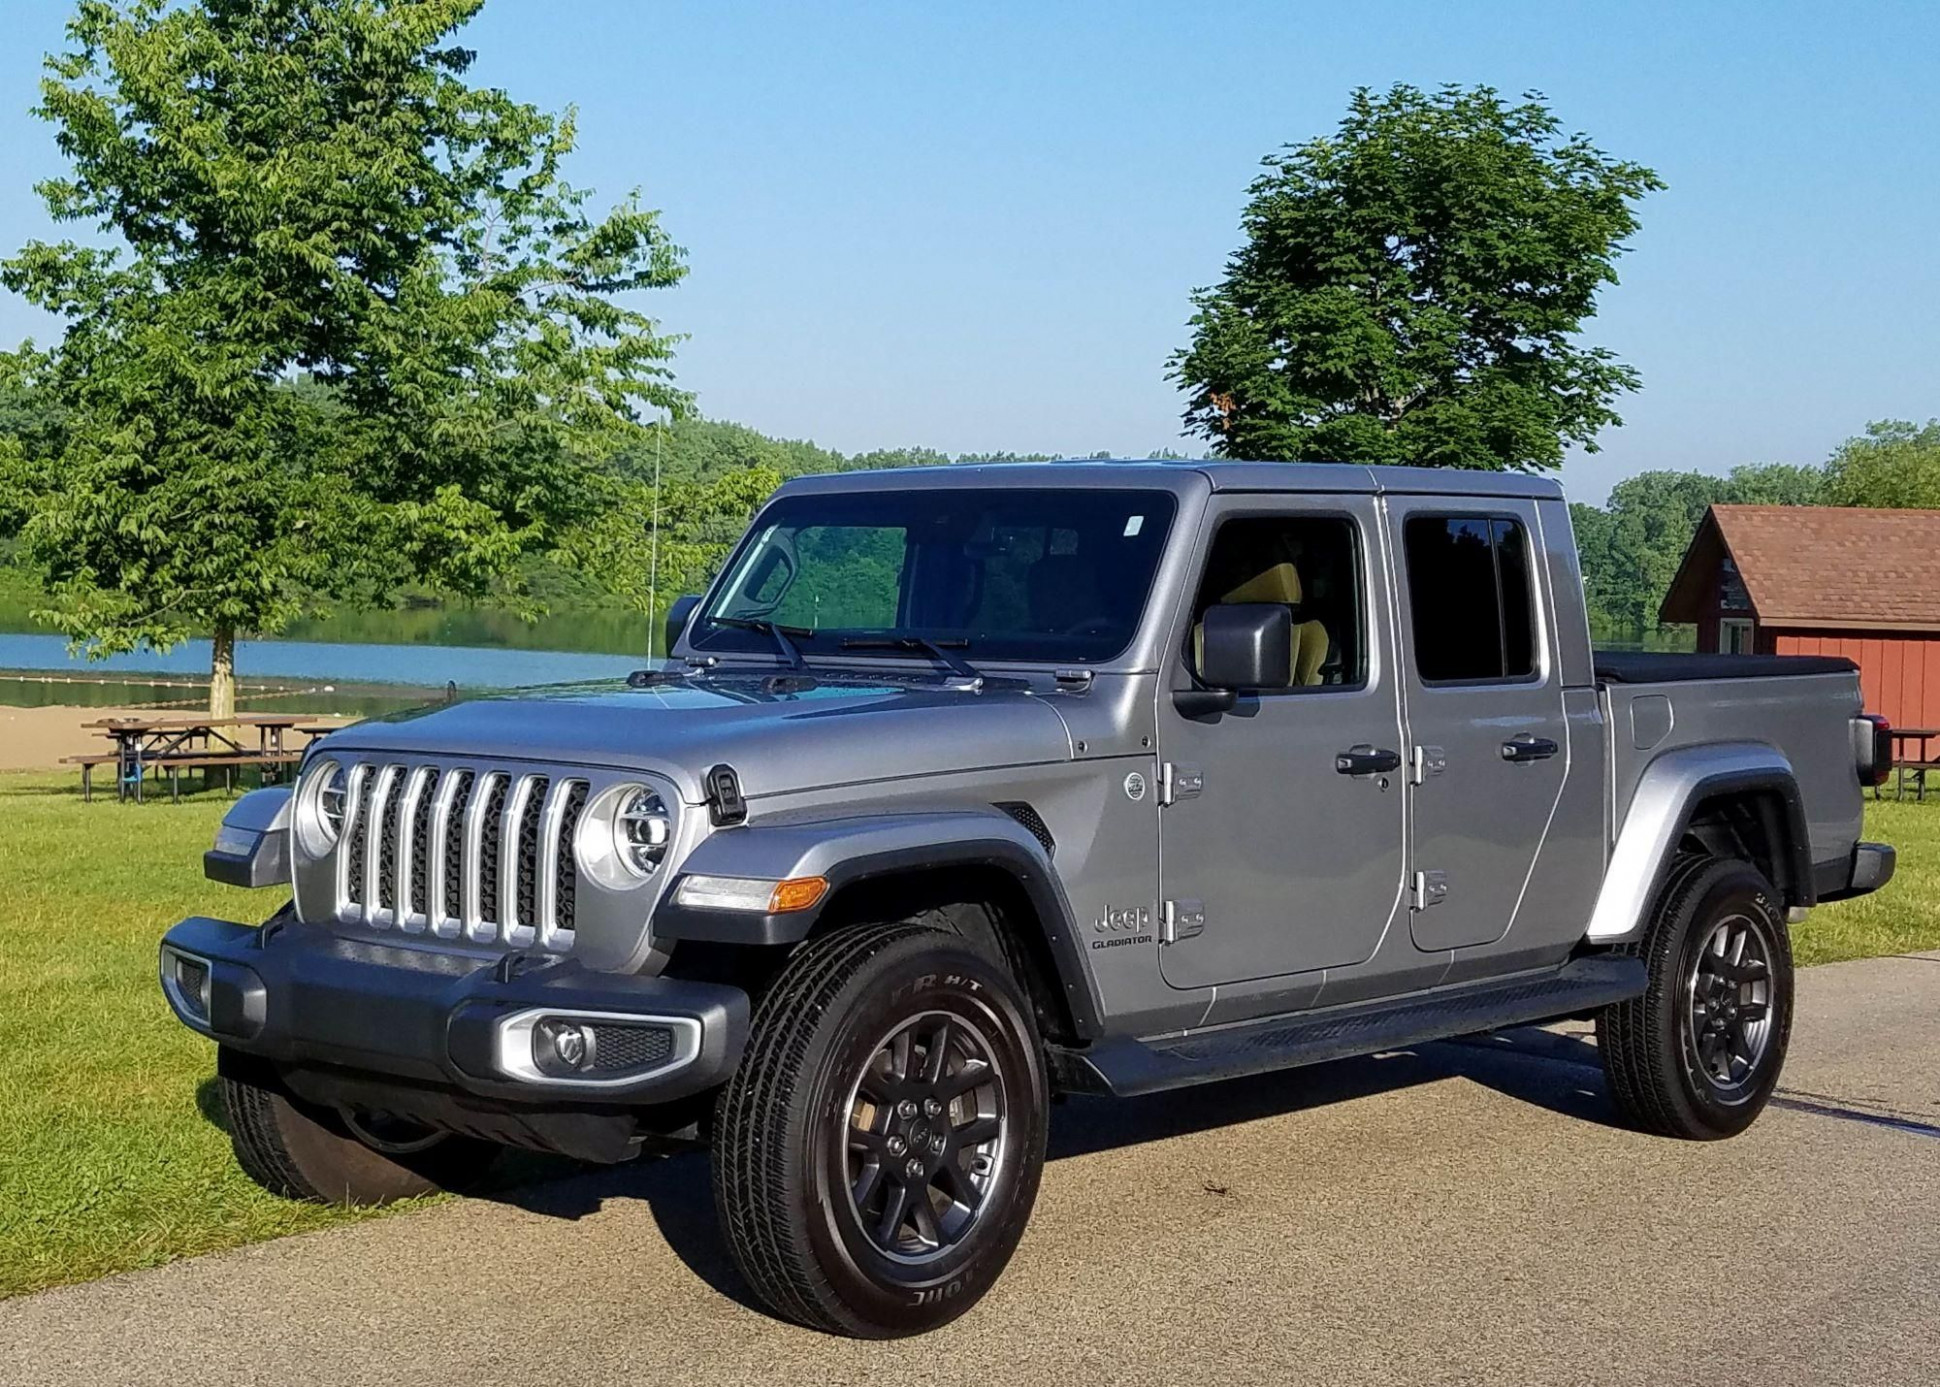 Release Date When Does The 2023 Jeep Gladiator Come Out